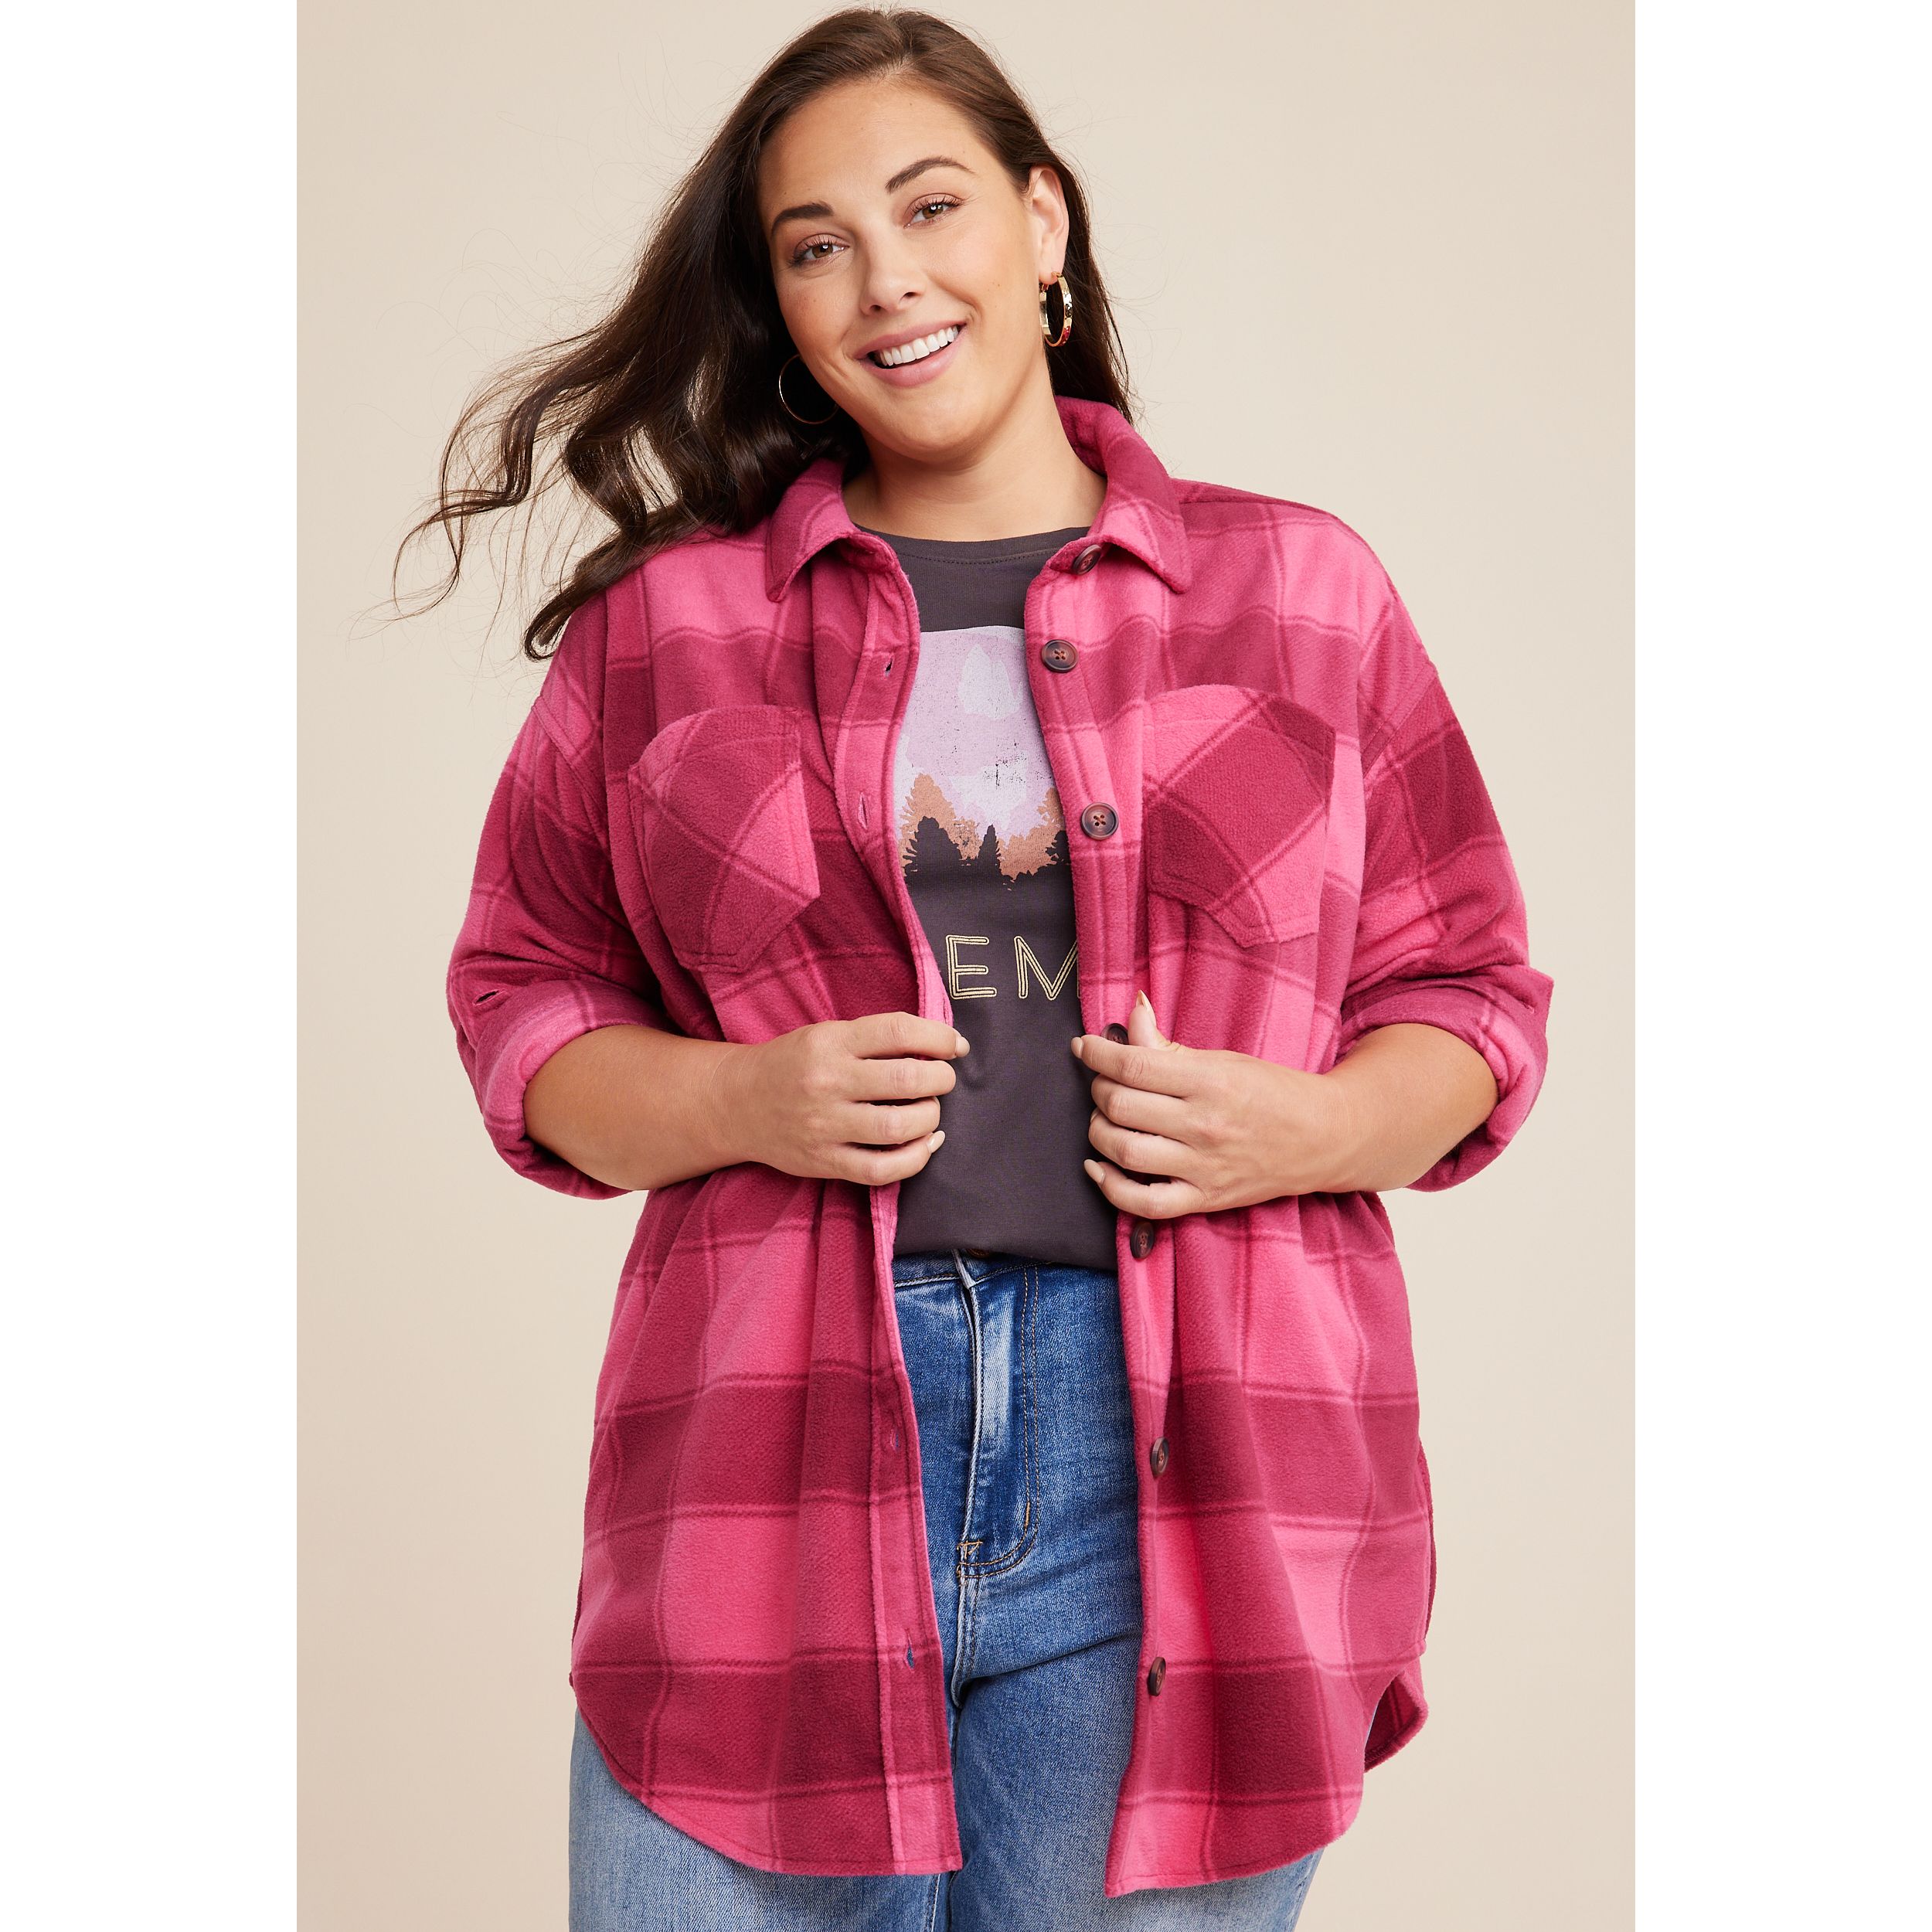 woman smiling wearing a pink flannel